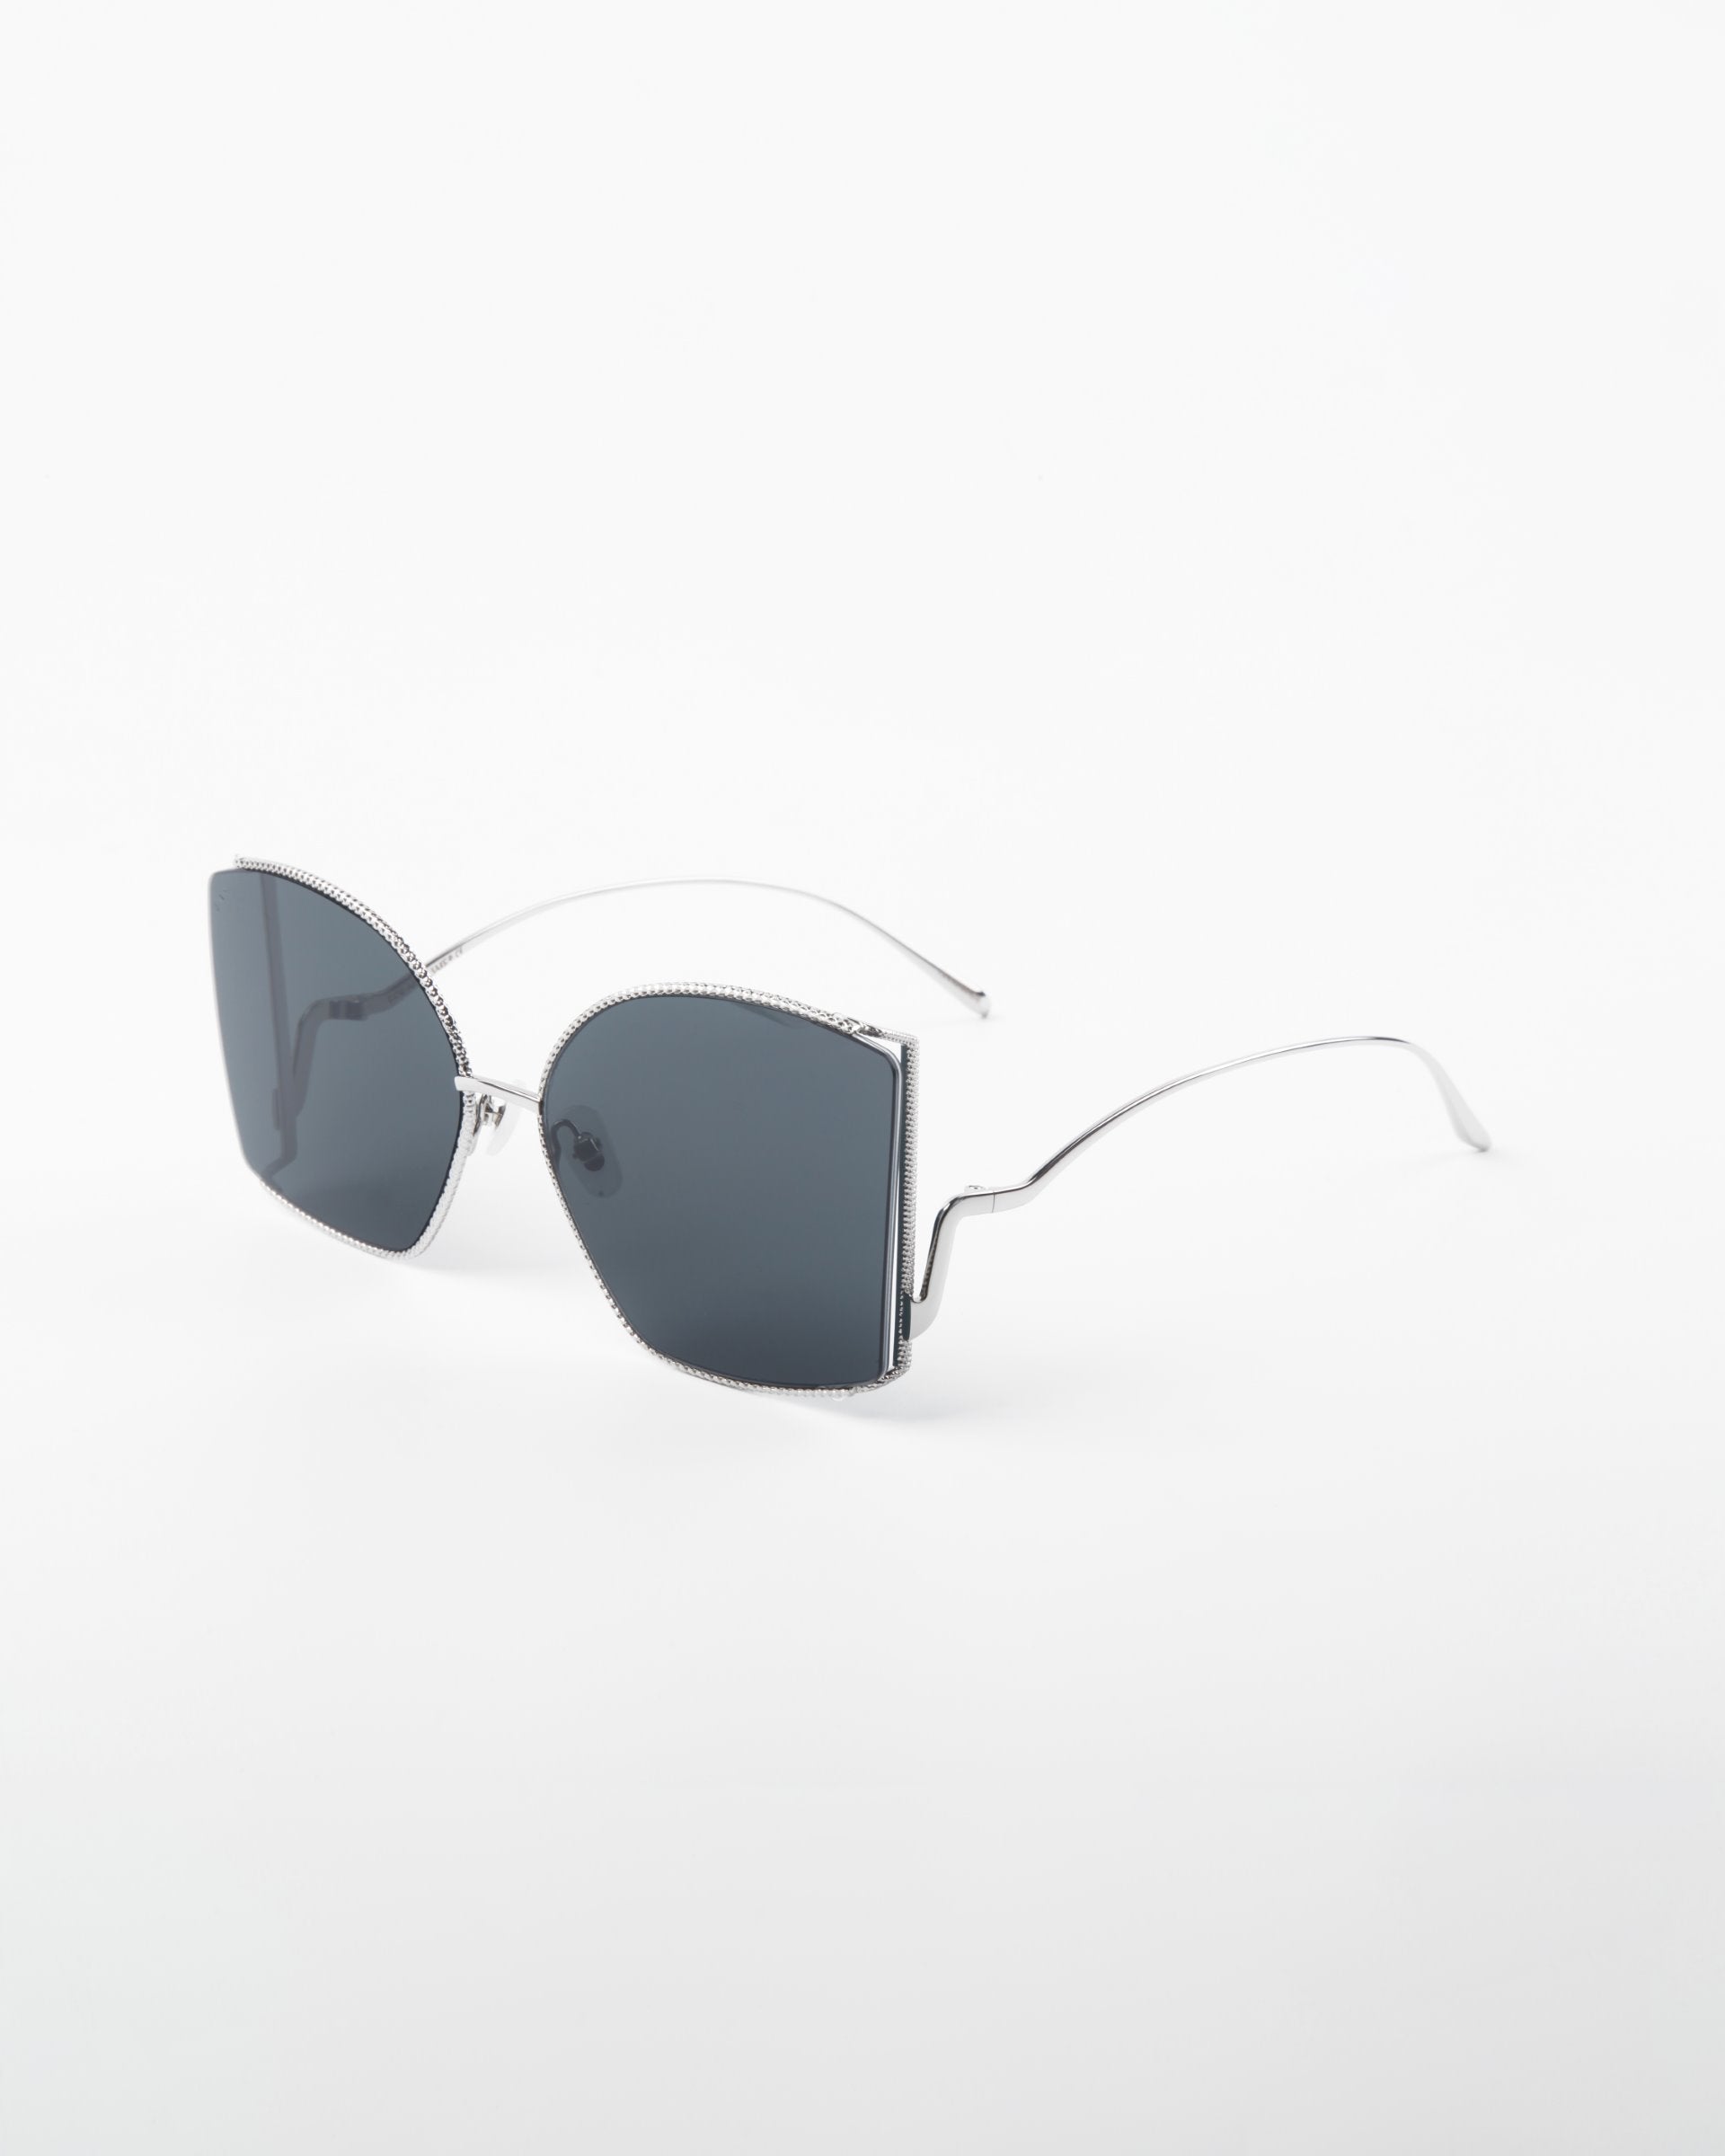 A pair of stylish, oversized, square-shaped Dixie sunglasses with dark lenses and thin, handmade gold-plated frames. The glasses, from the brand For Art&#39;s Sake®, feature a minimalist and sleek design with UV protection, laid on a plain white background.